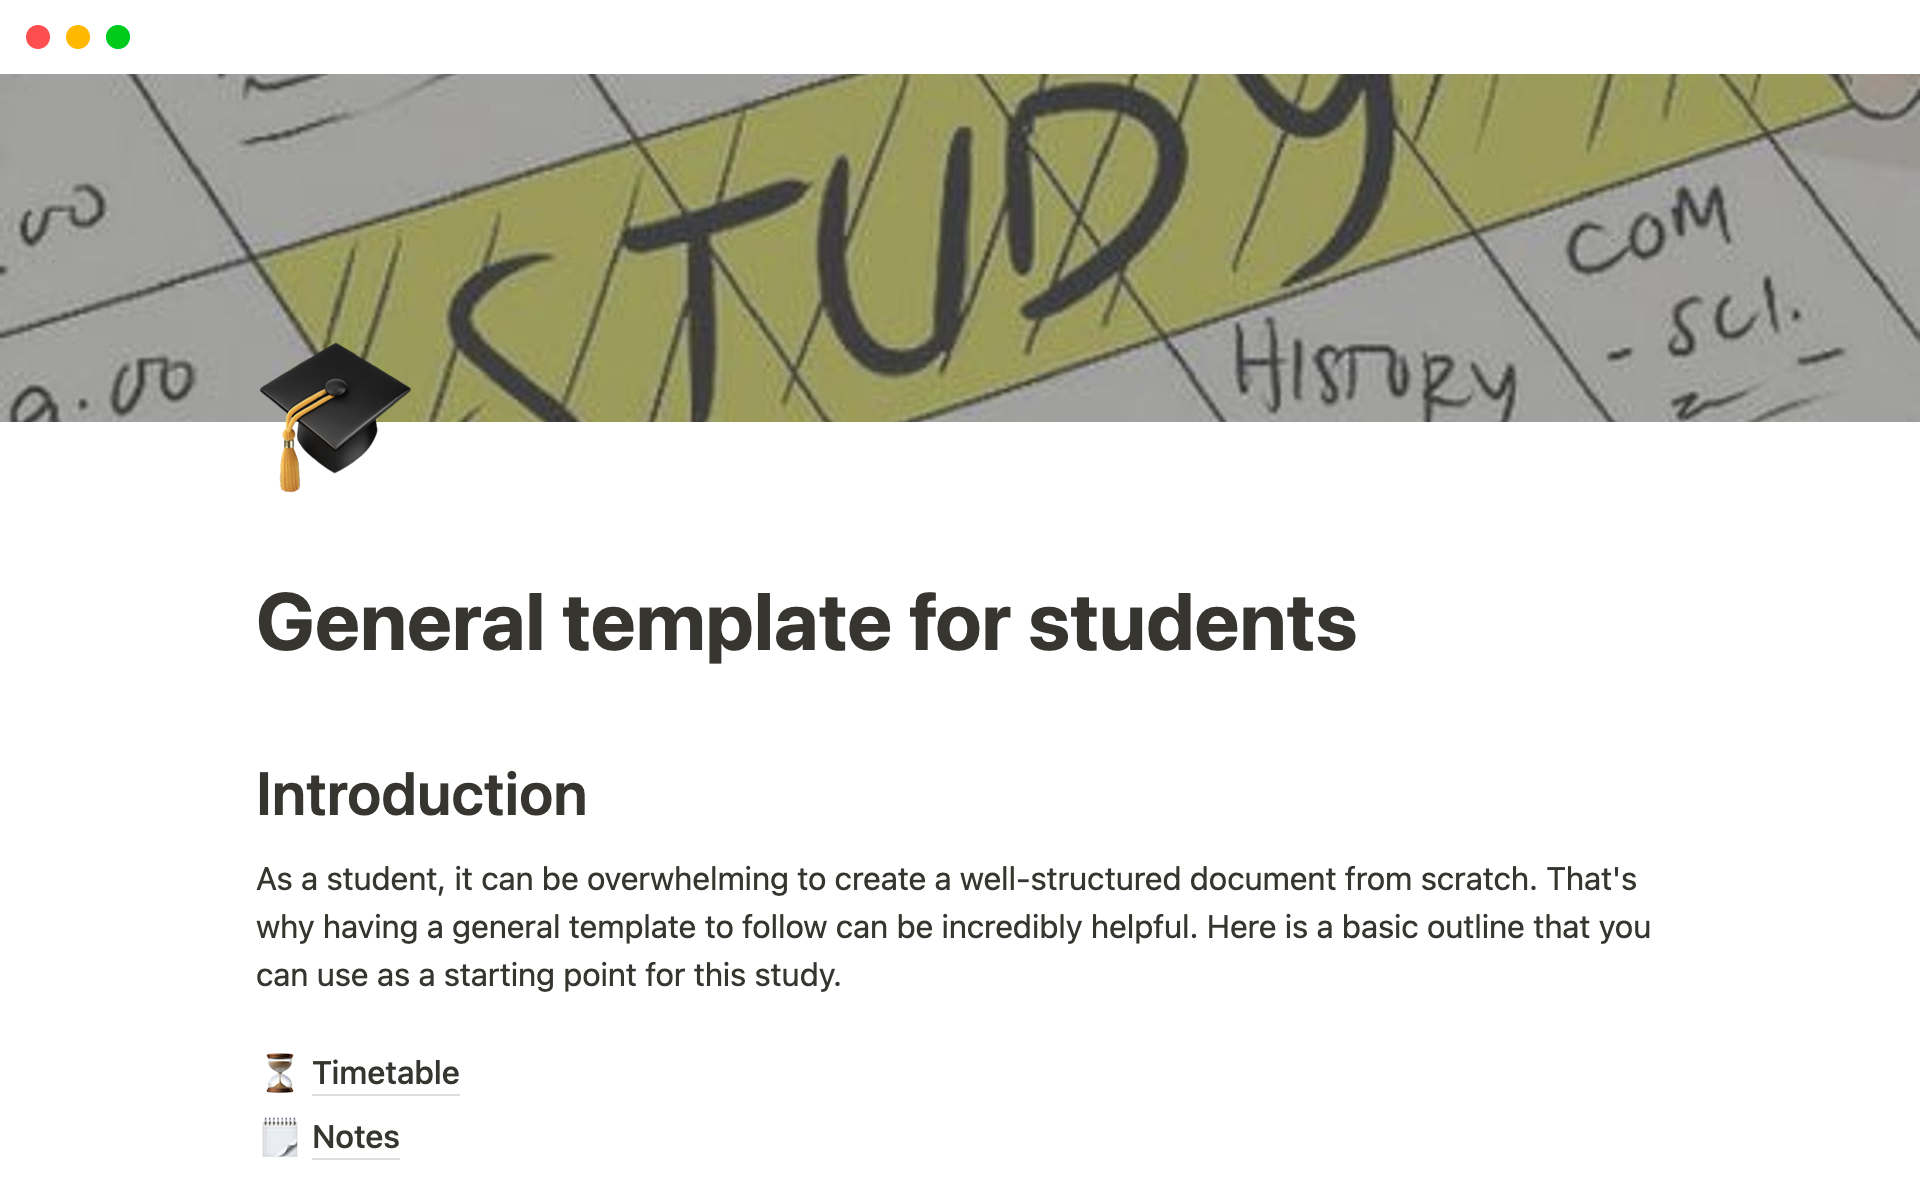 This Notion template for study provides a well-structured outline to follow, including a timetable, notes, and a check list.